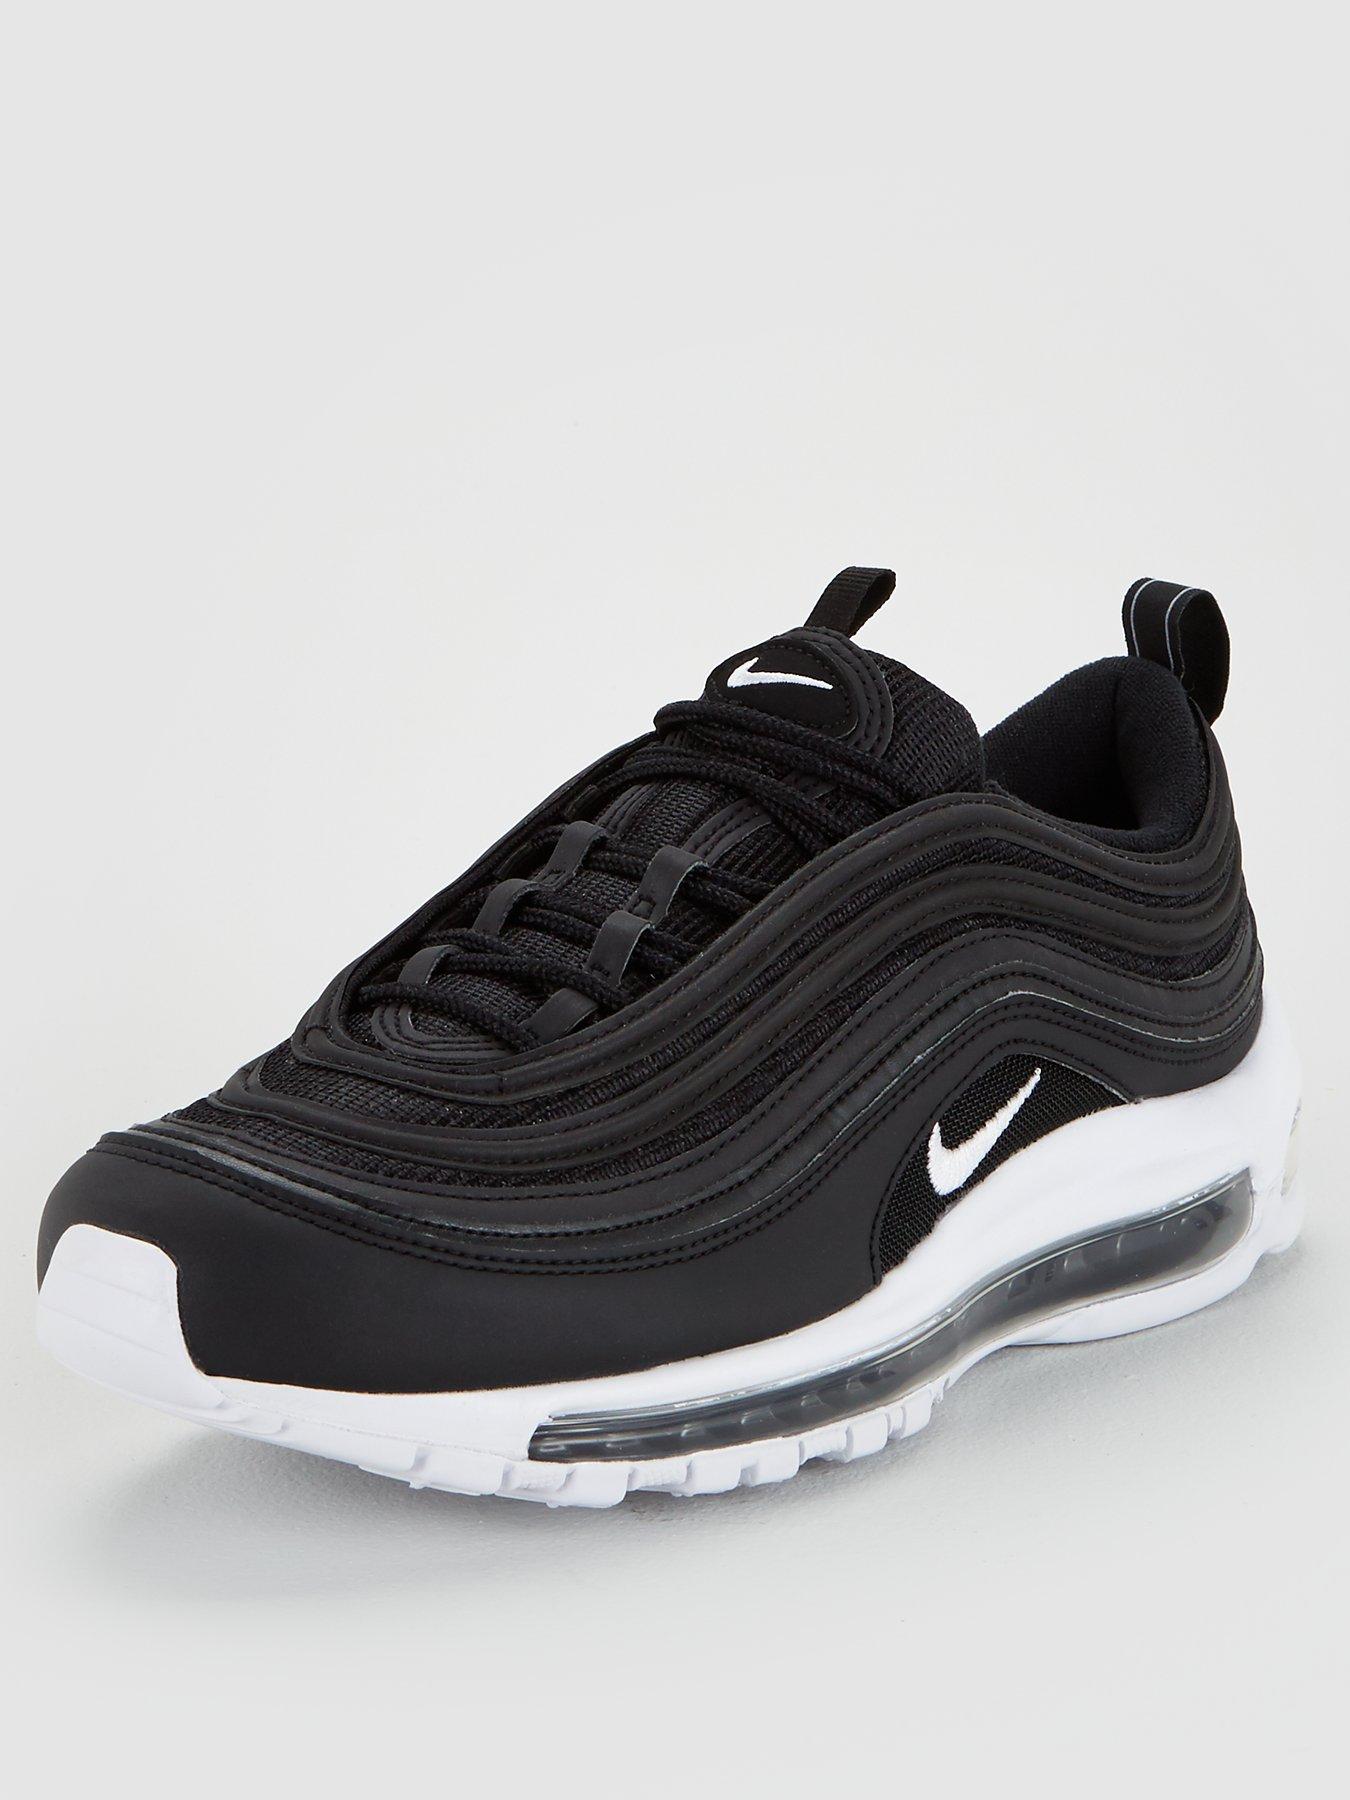 97s size 6